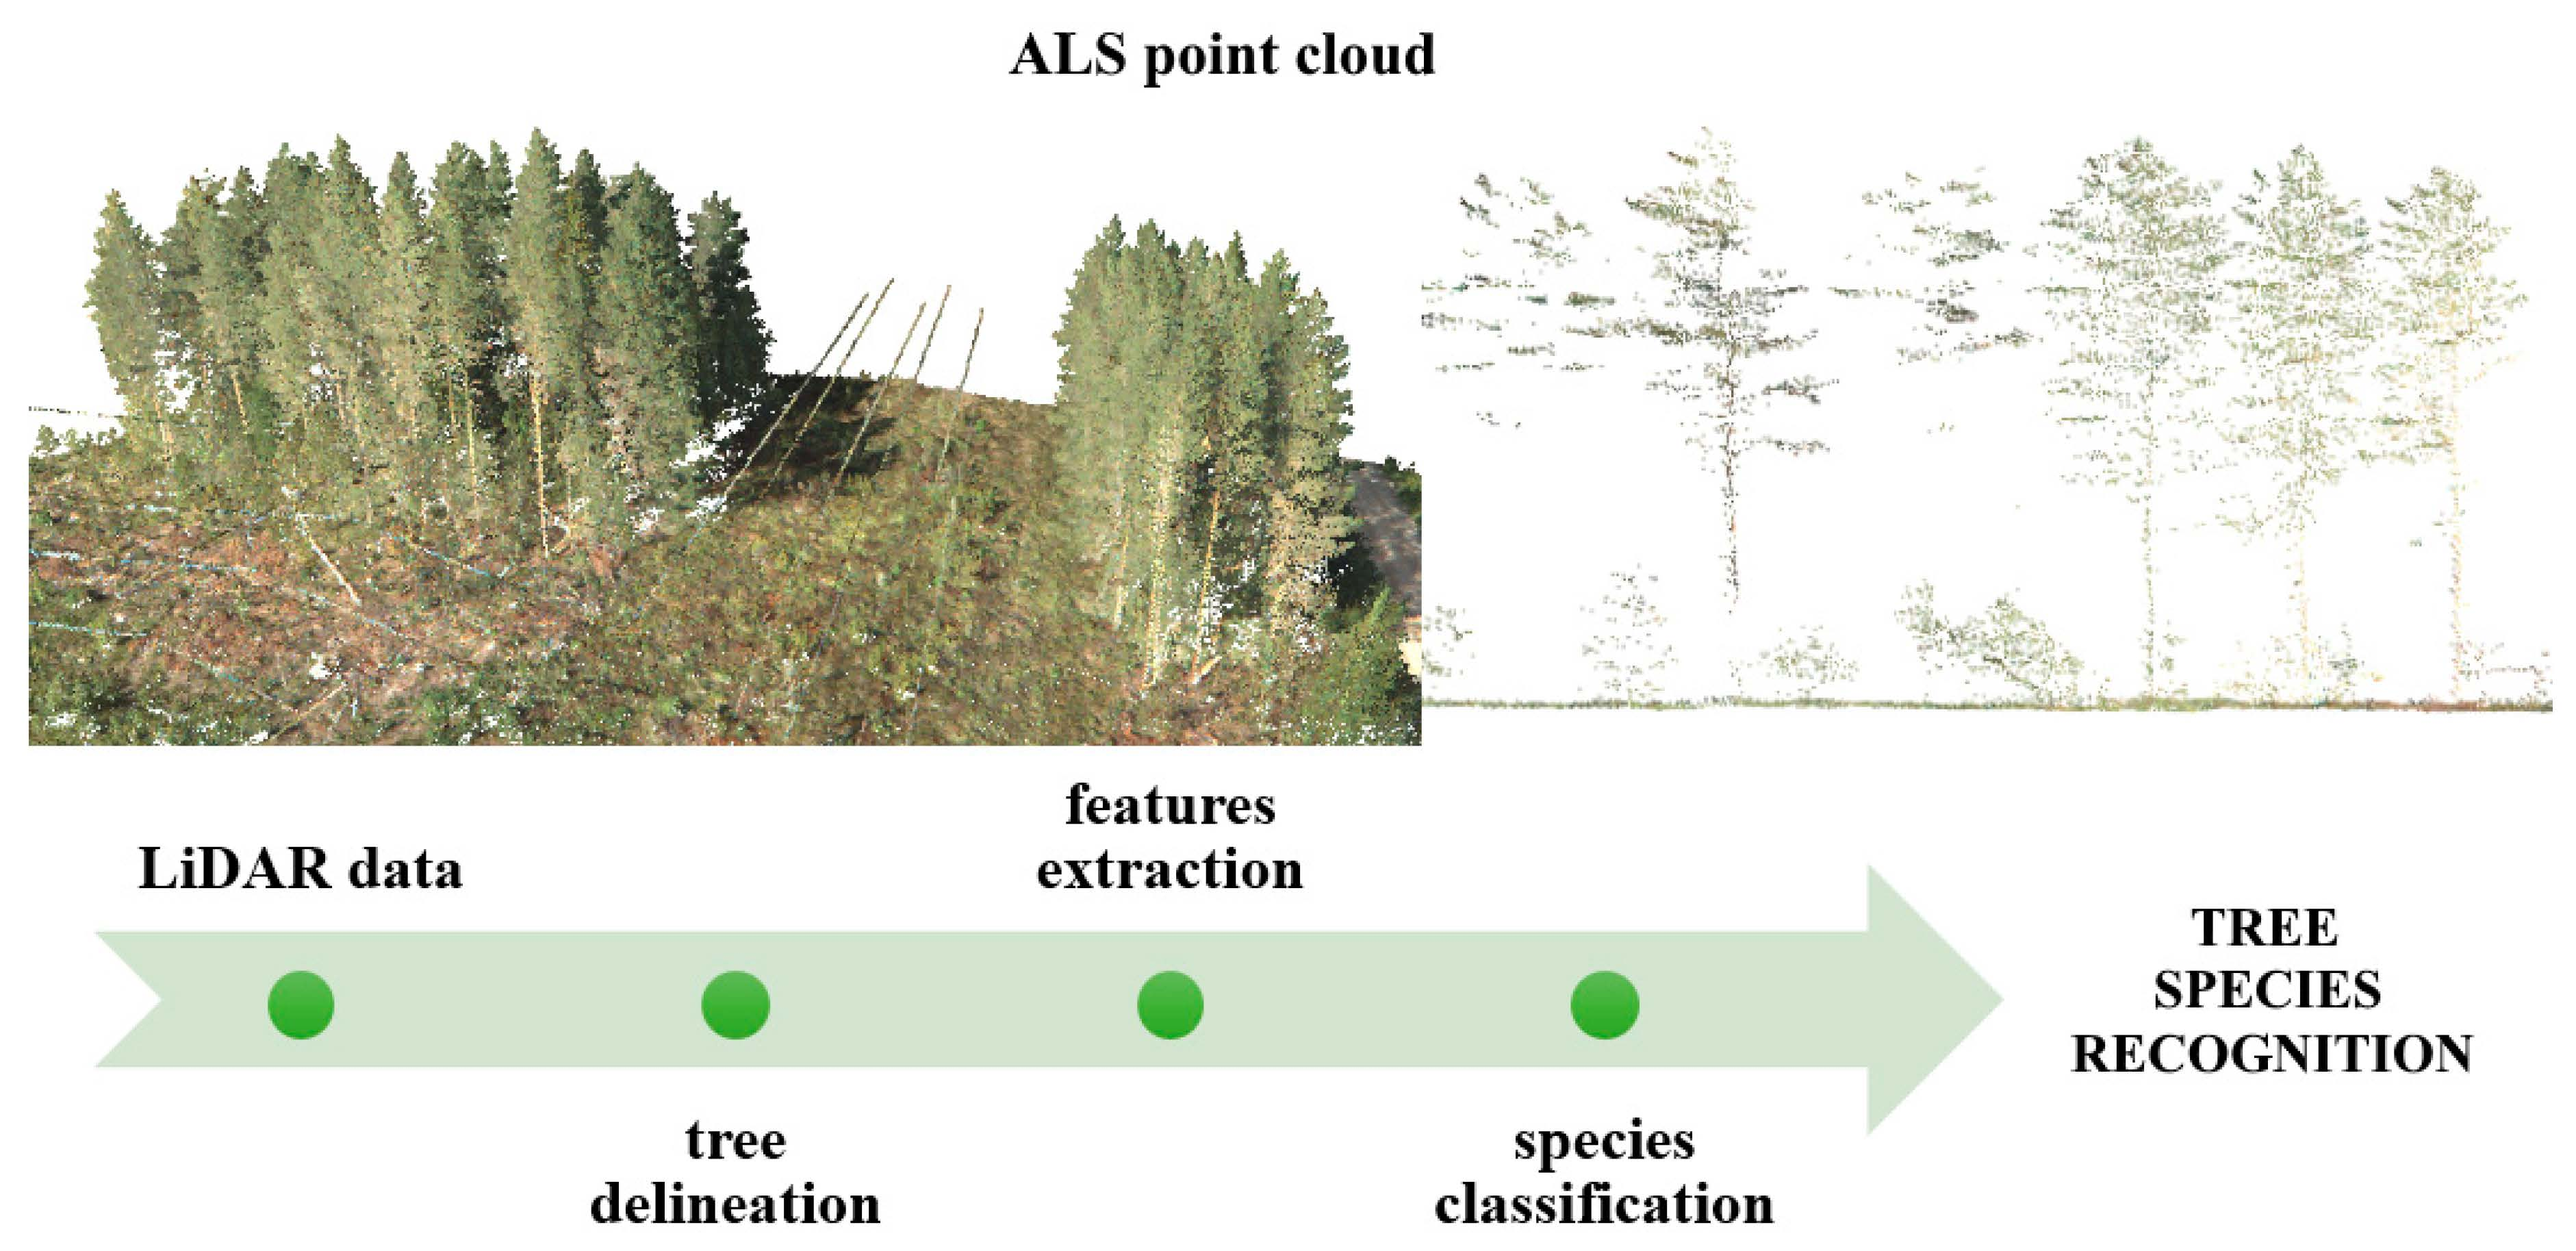 Remote Sensing | Free Full-Text | A Review of Tree Species Classification  Based on Airborne LiDAR Data and Applied Classifiers